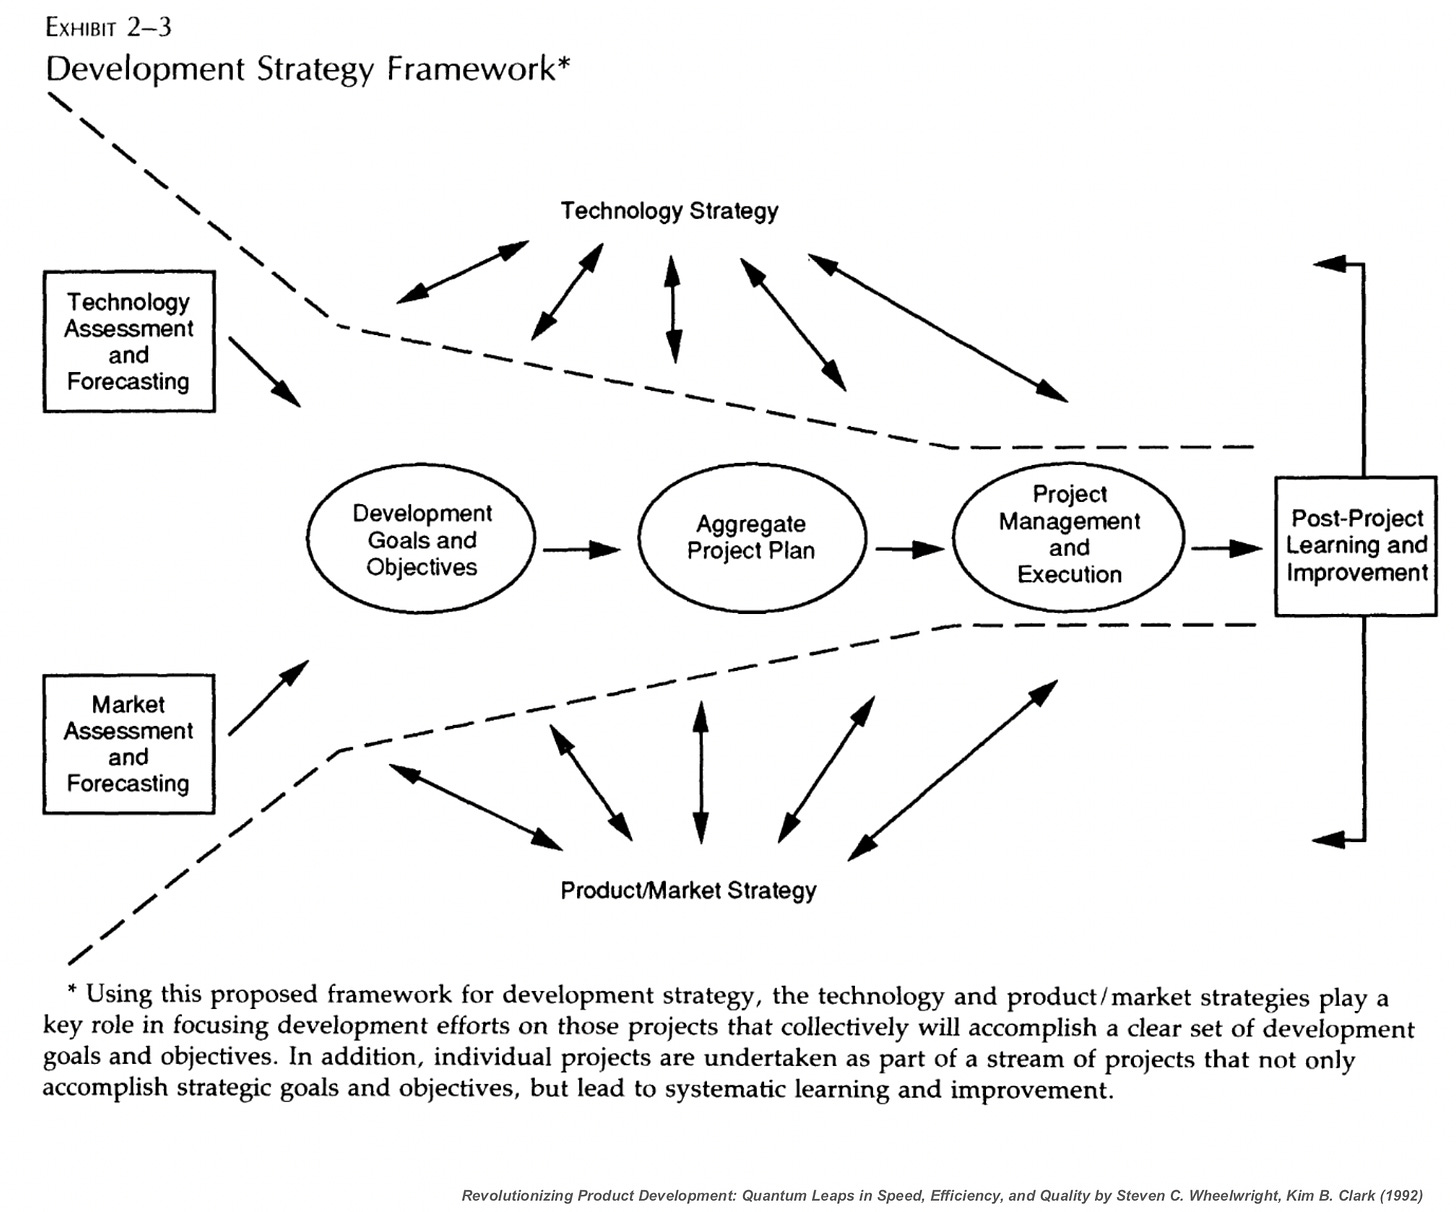 The development strategy framework or "funnel".  Technology assessment and forecasting feeding into development goals then project plan then management an d execution and improvement at the end outside the funnel feeding back.